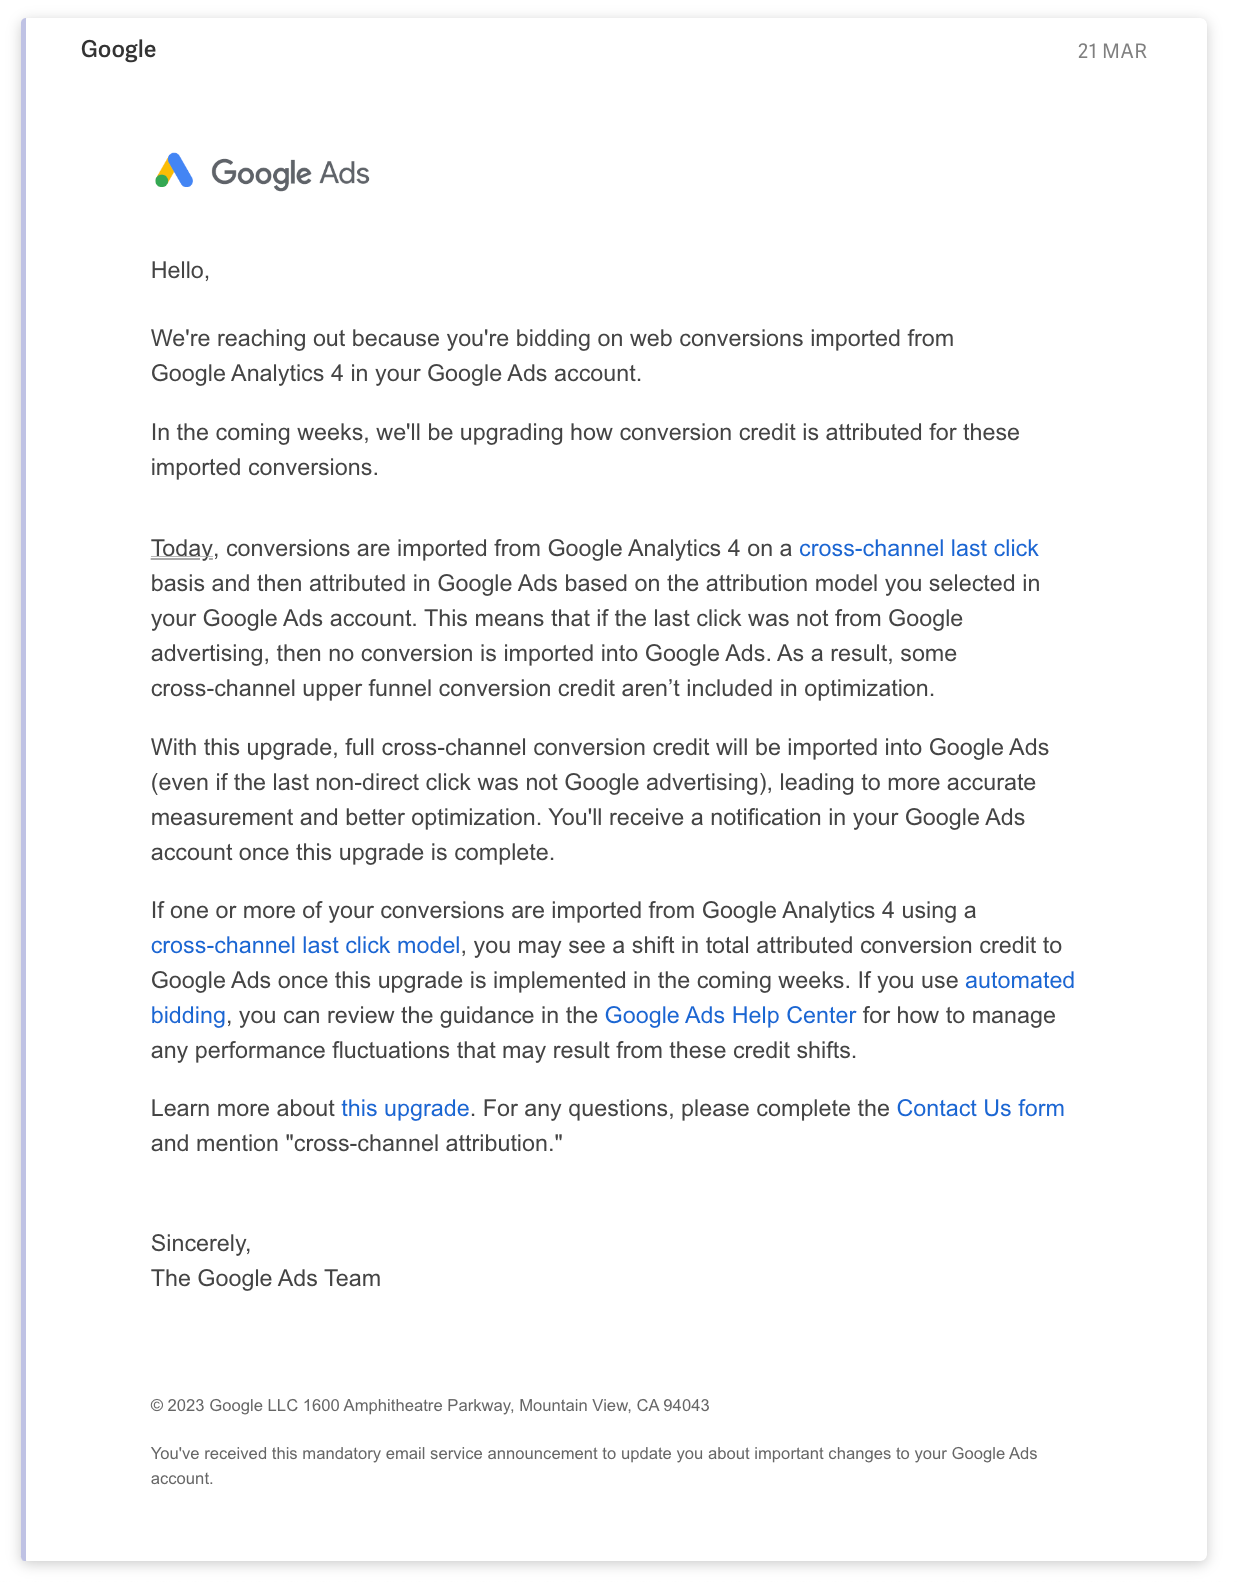 Email from Google explaining “full cross-channel conversion credit will be imported into Google Ads (even if the last non-direct click was not Google advertising)